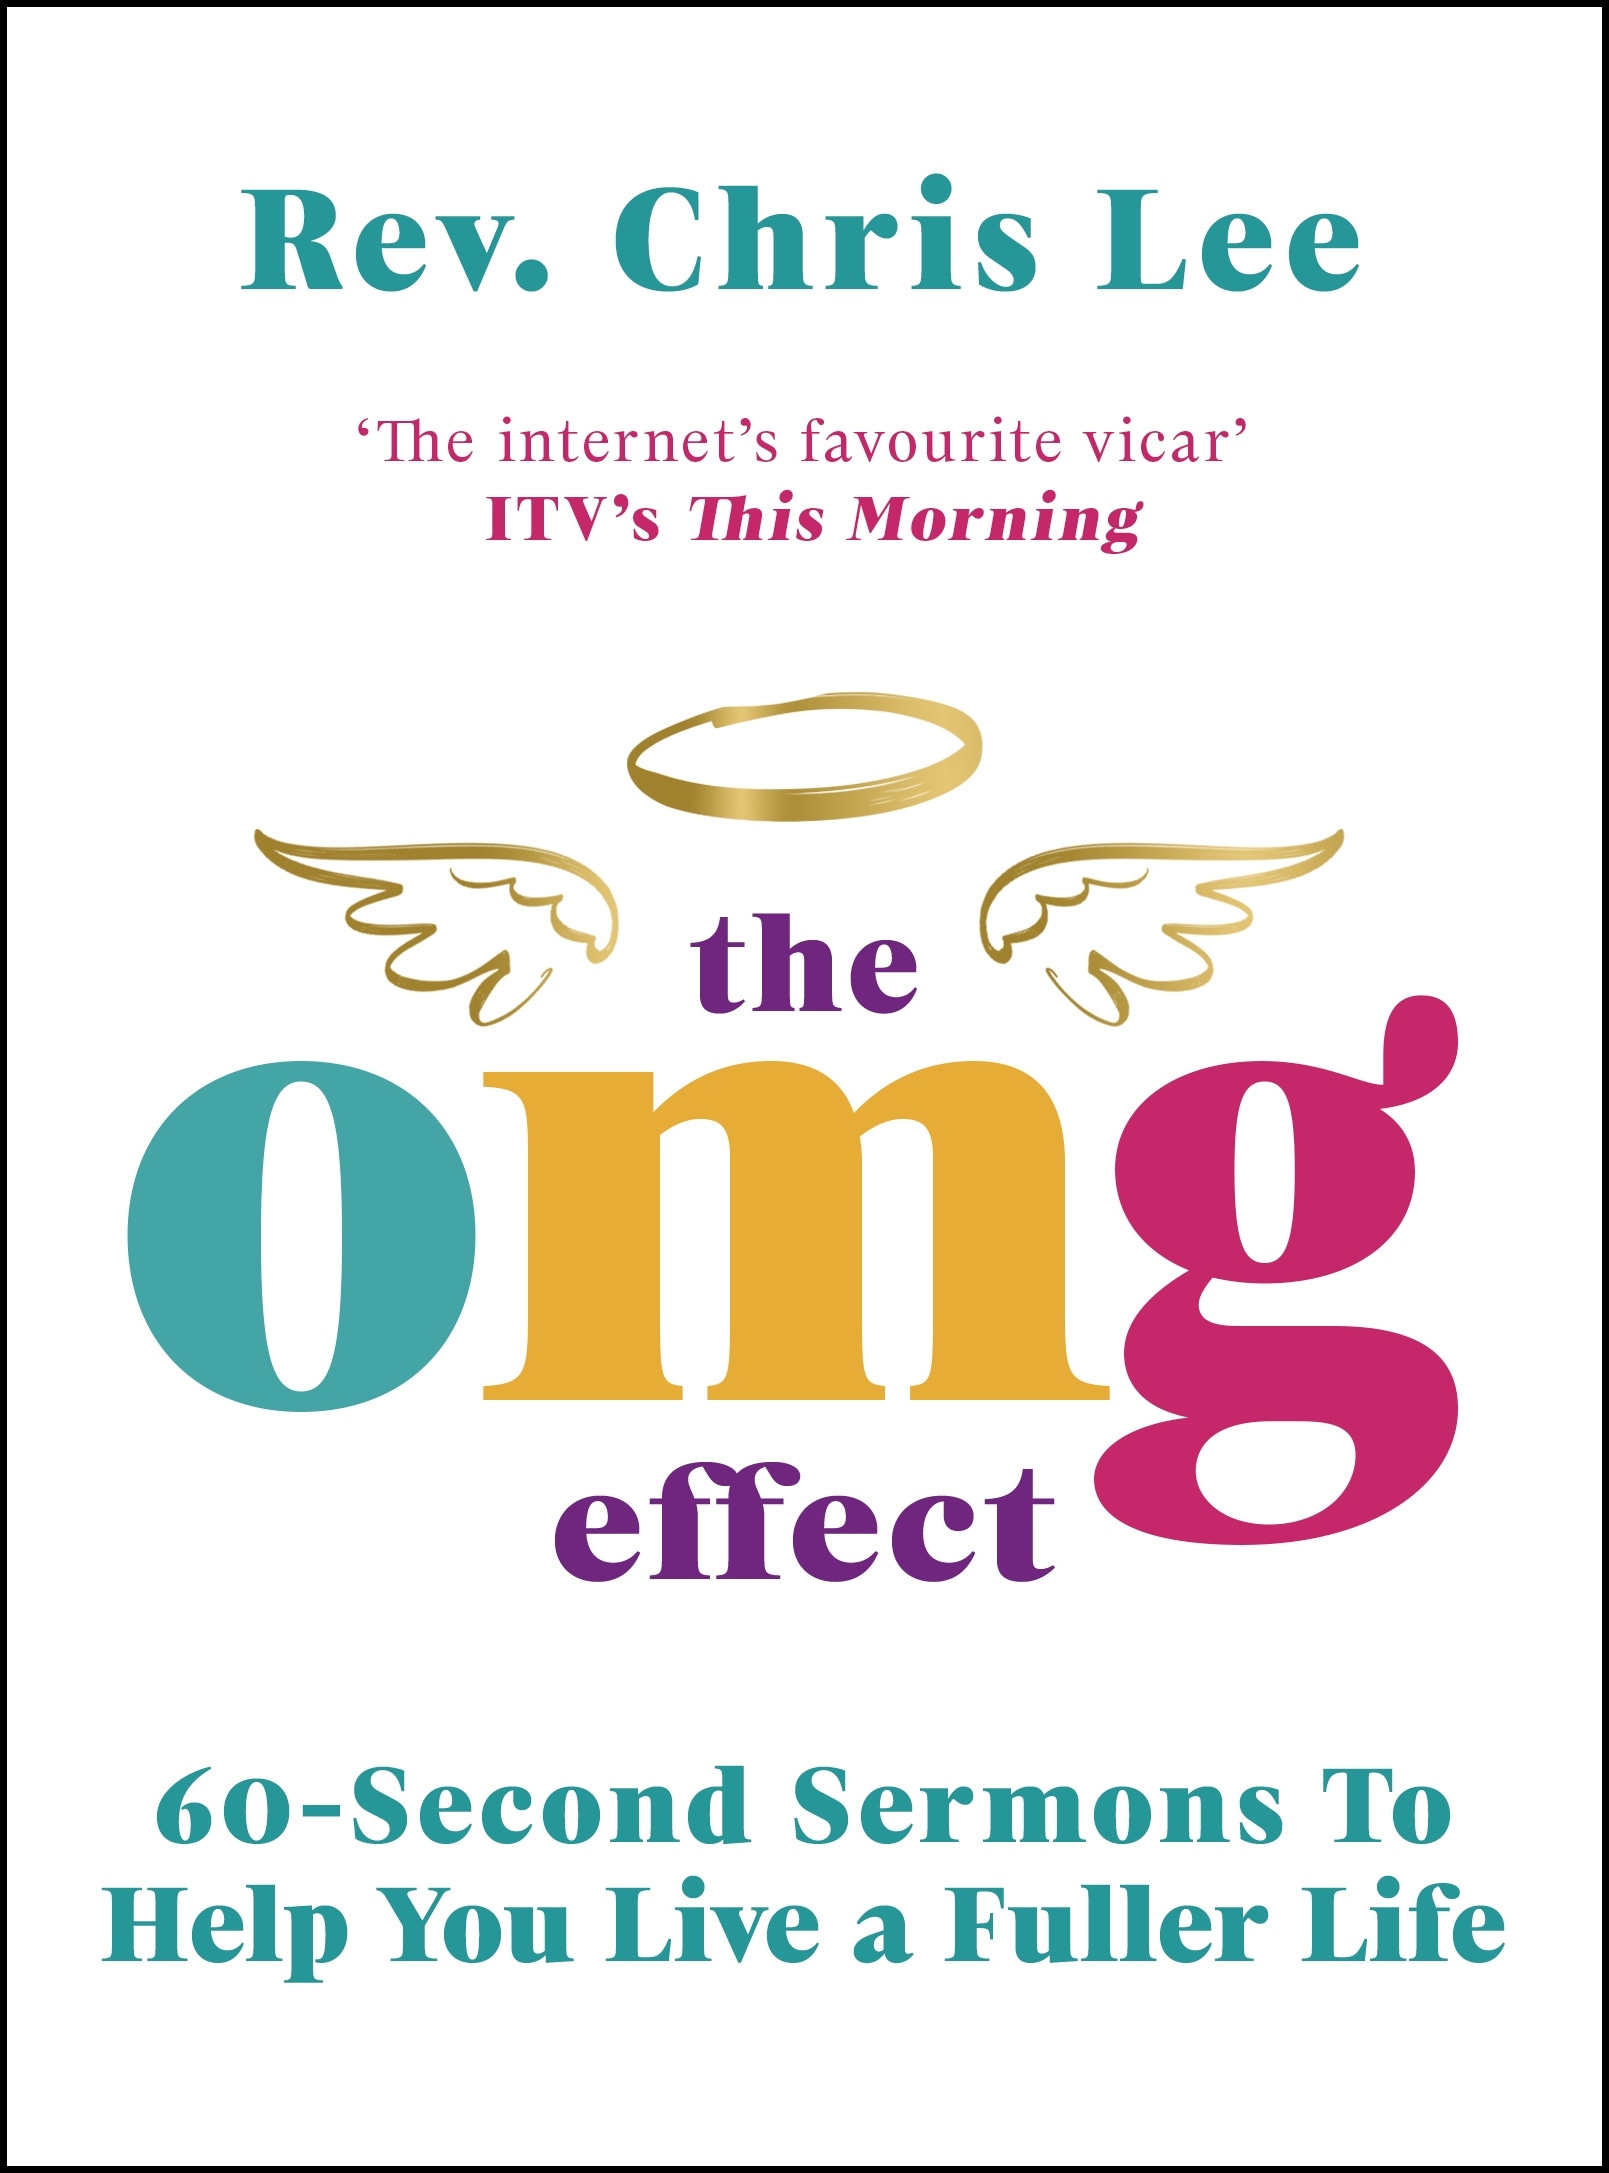 Book “The OMG Effect” by Chris Lee — November 26, 2020